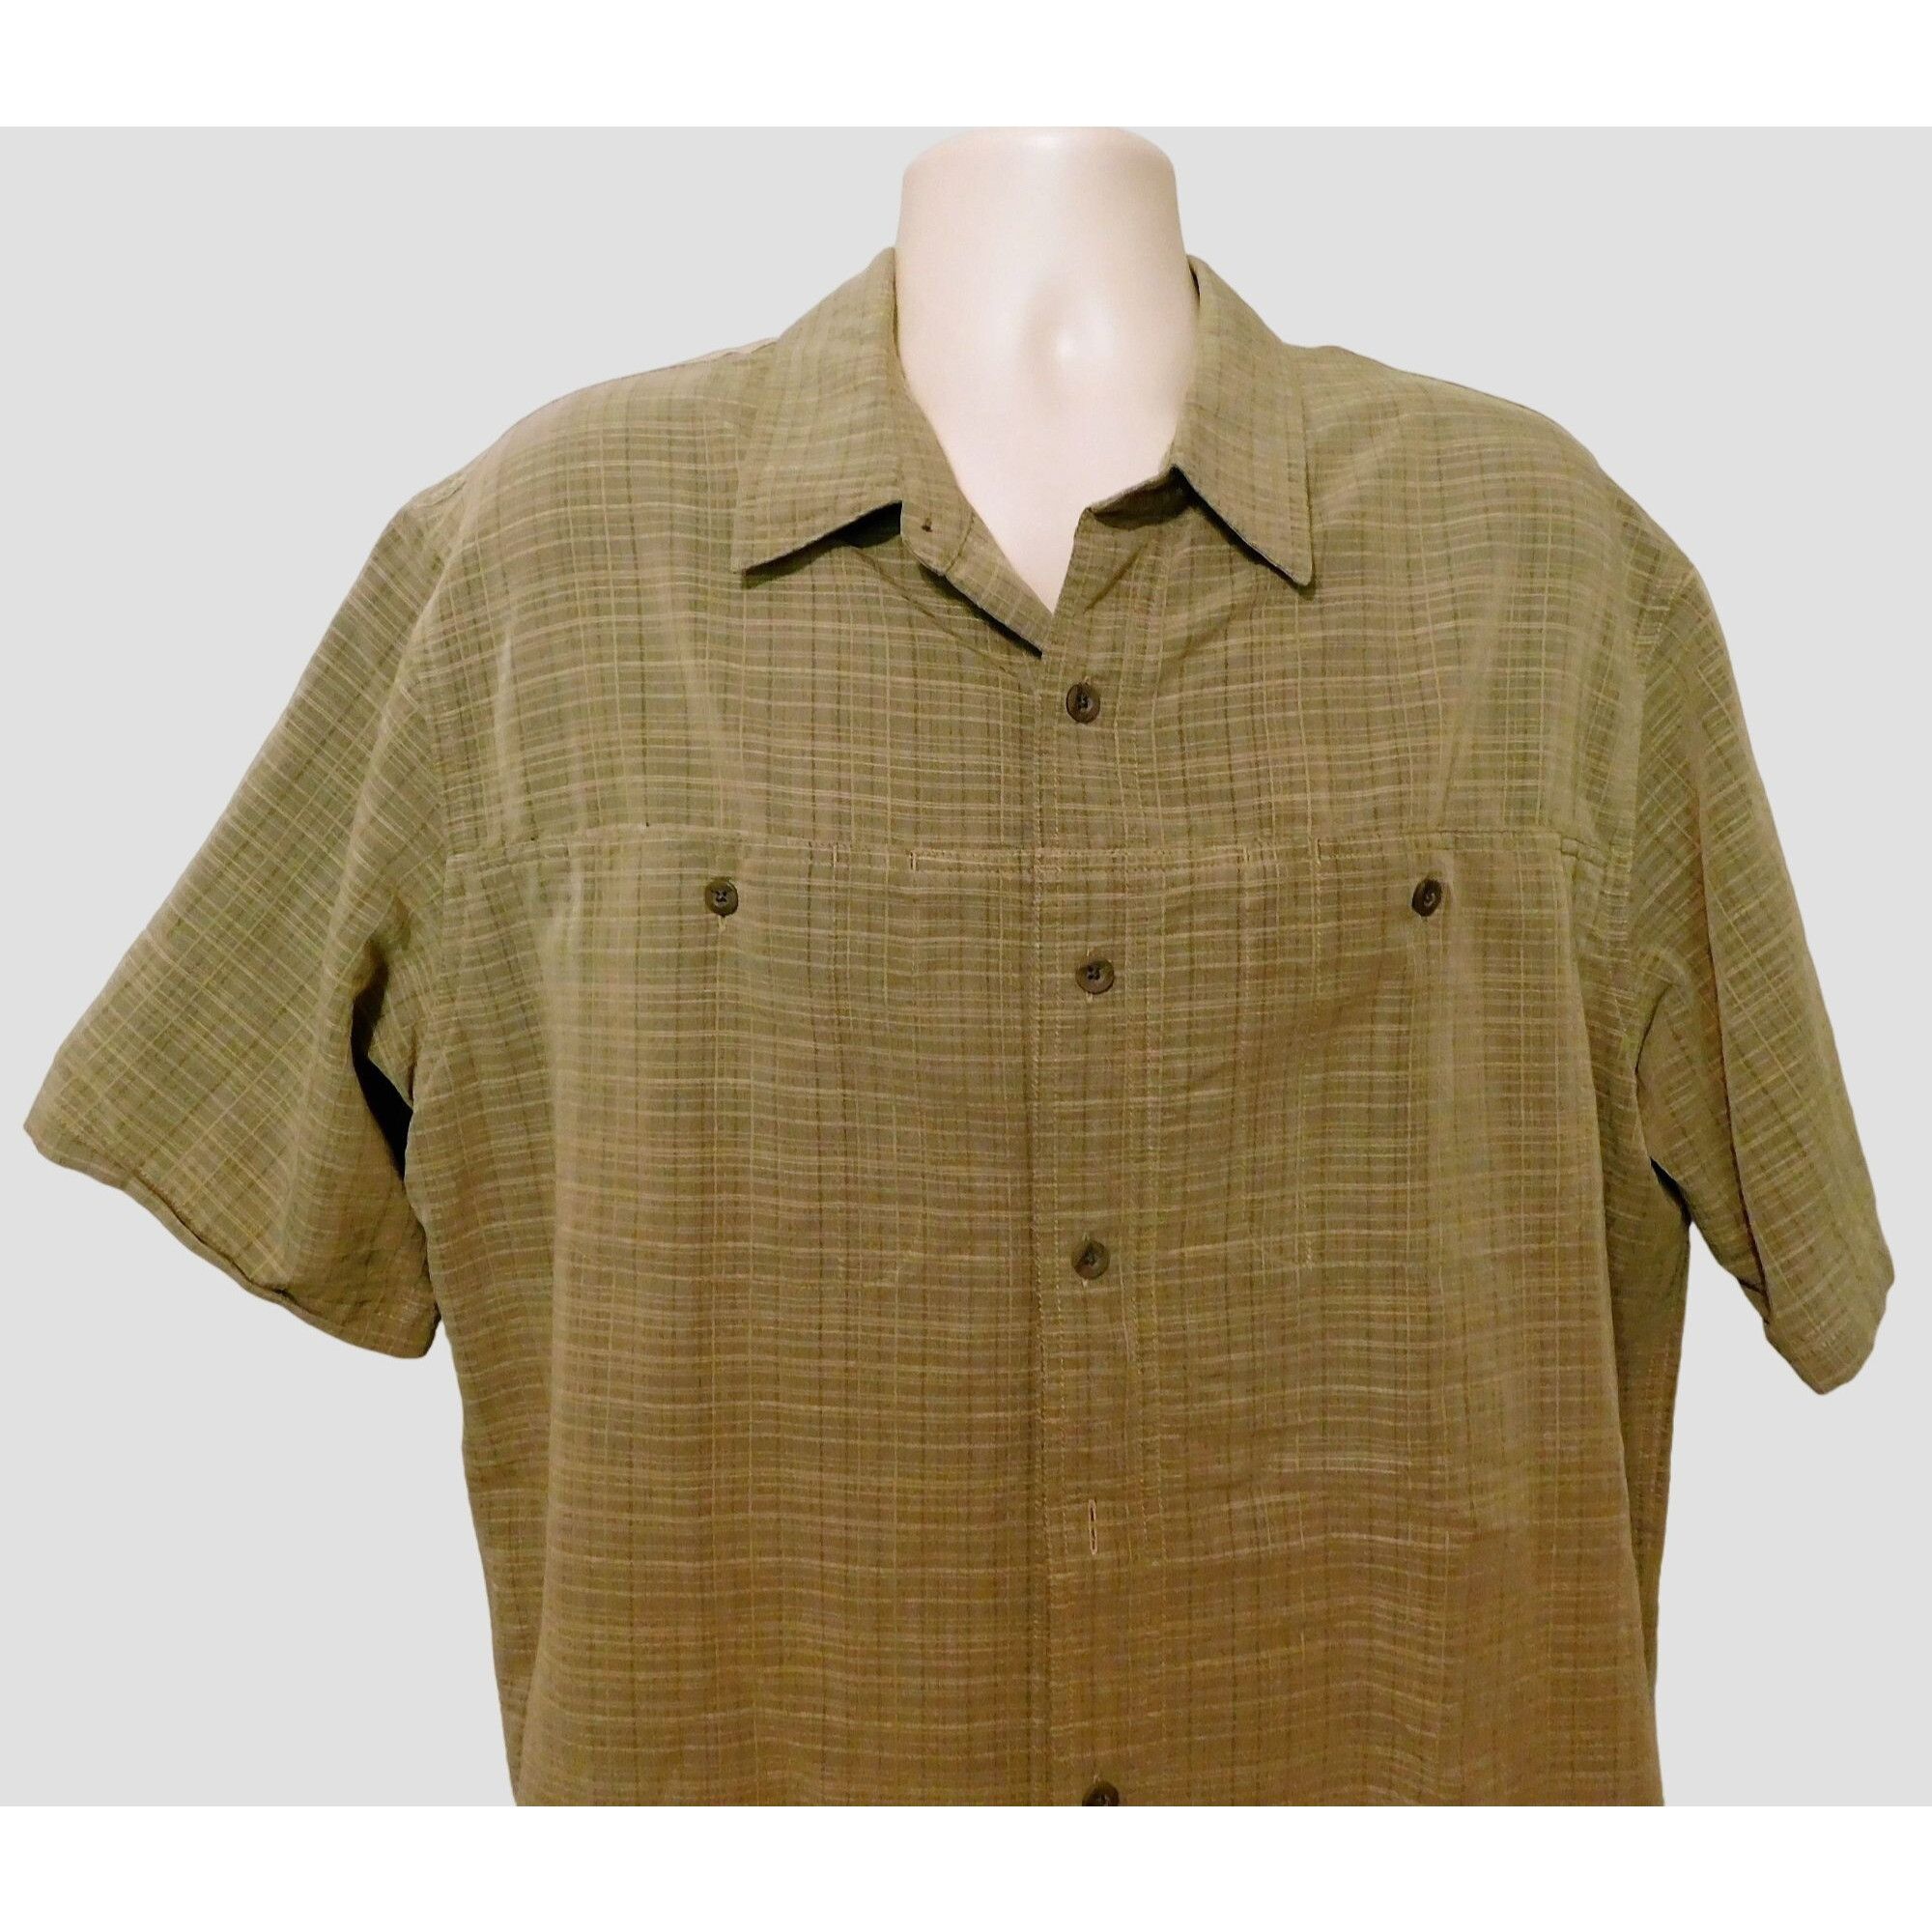 Other 5.11 Tactical Shirt XL Concealed Carry Green Plaid Short Slv Size US XL / EU 56 / 4 - 2 Preview